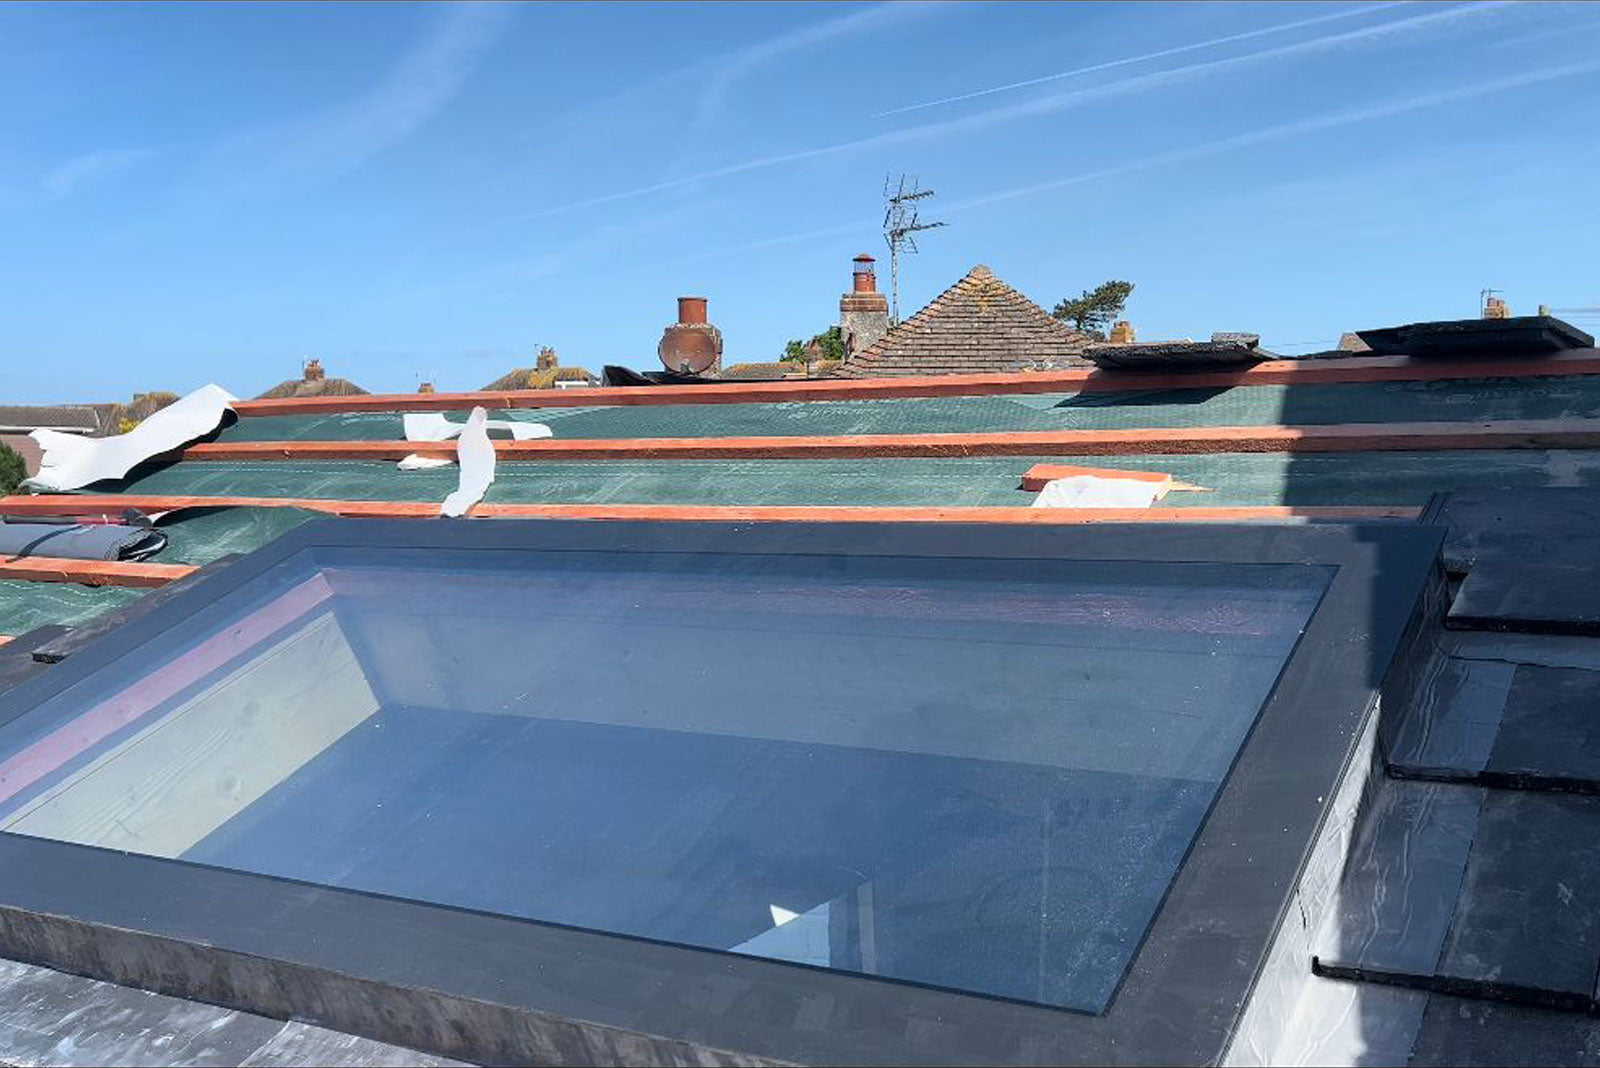 Pitched Roof Skylight 600 x 2500mm